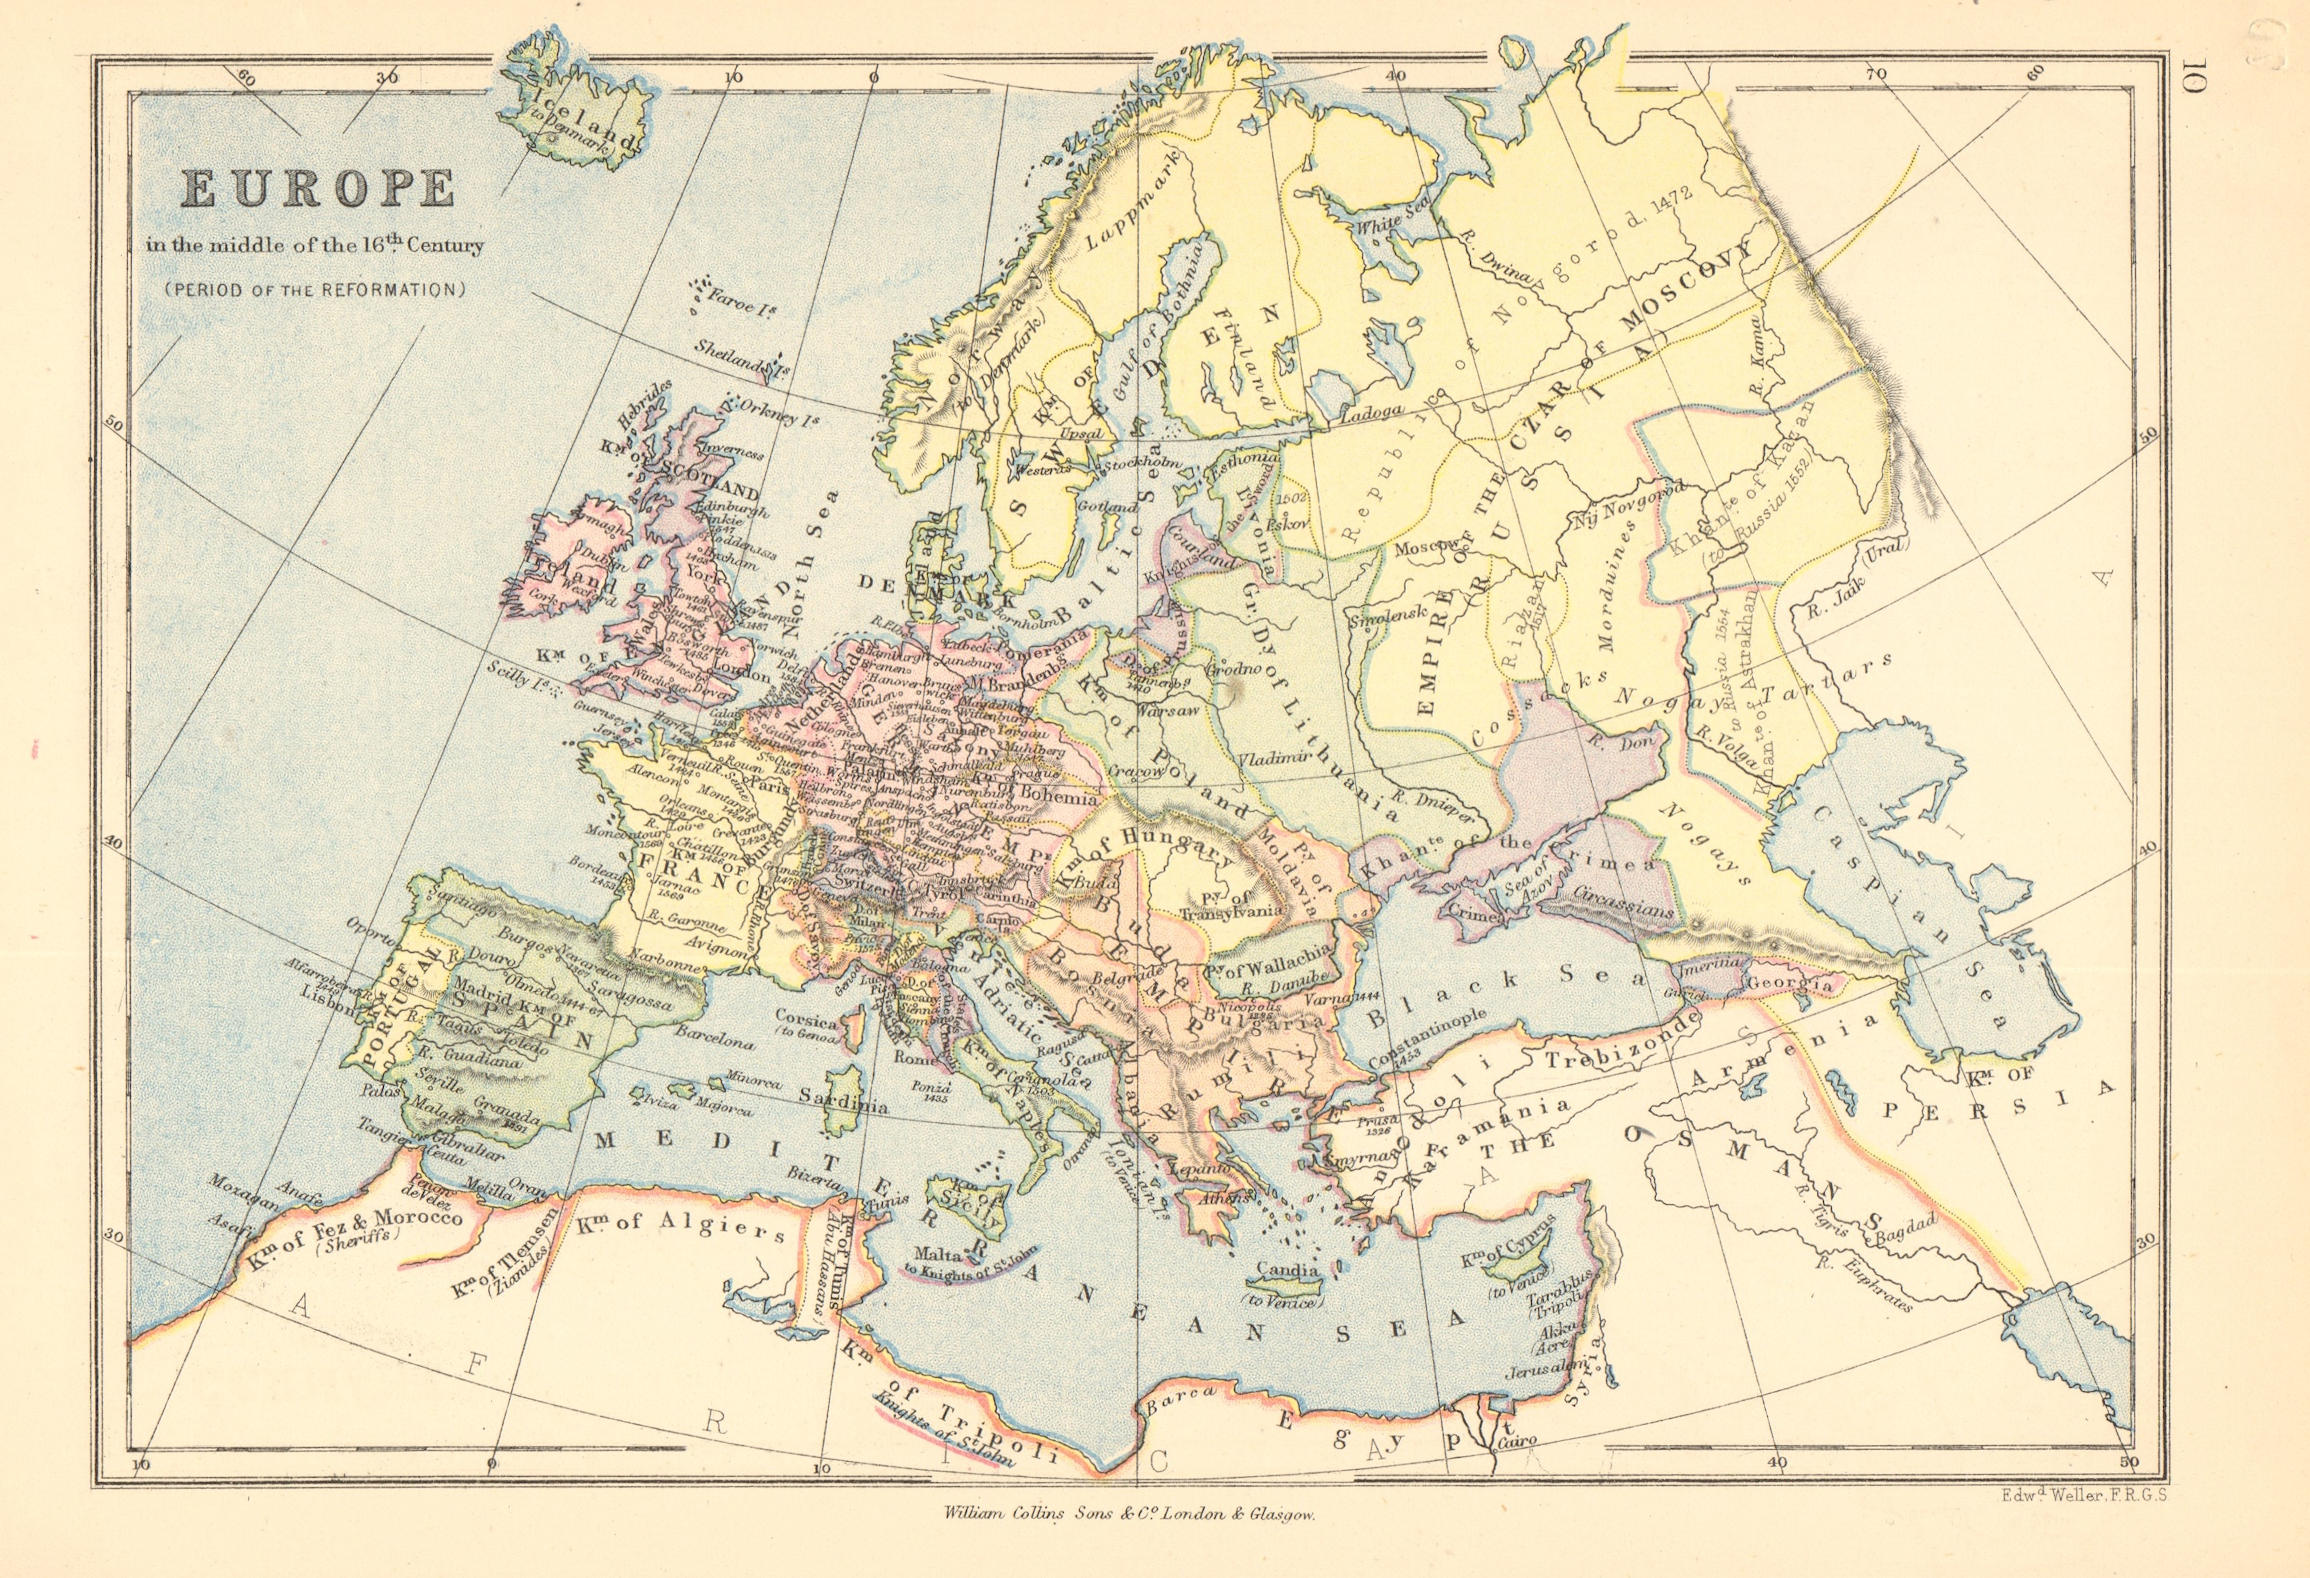 Associate Product 'Europe in the middle of the 16th Century (Period of the Reformation)' 1876 map